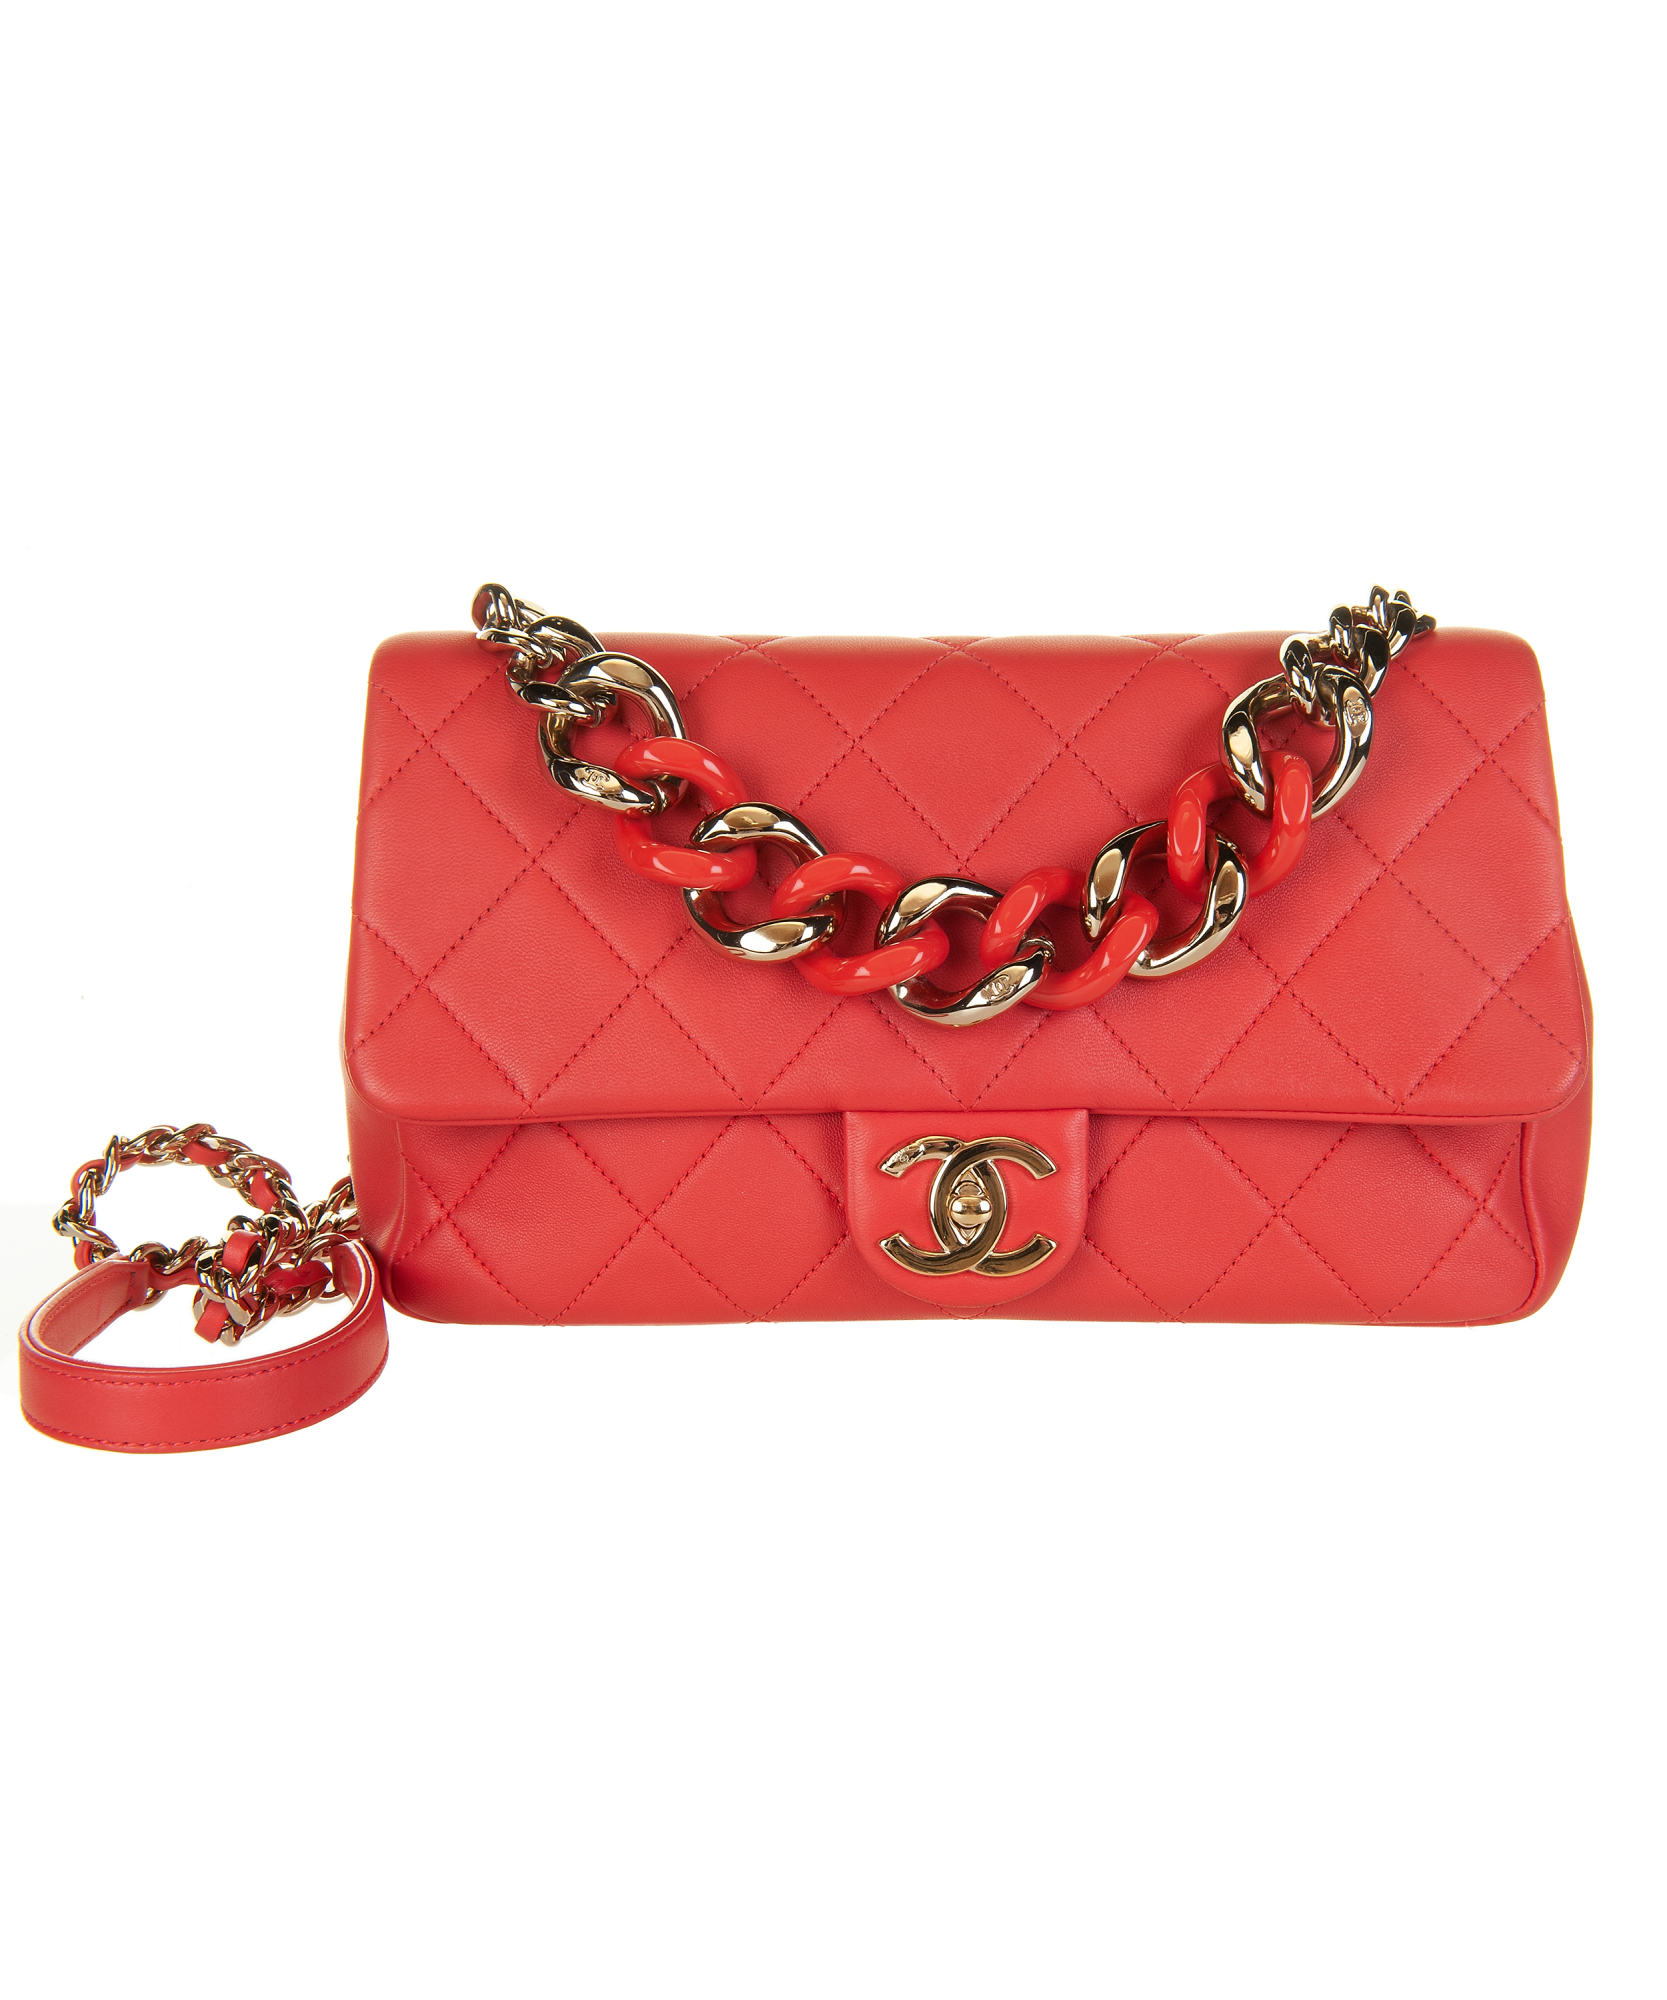 Chanel Red Flap Bag With Large Bi-Color Chain - Cruise Collection 2019 -  Chanel | ArtListings